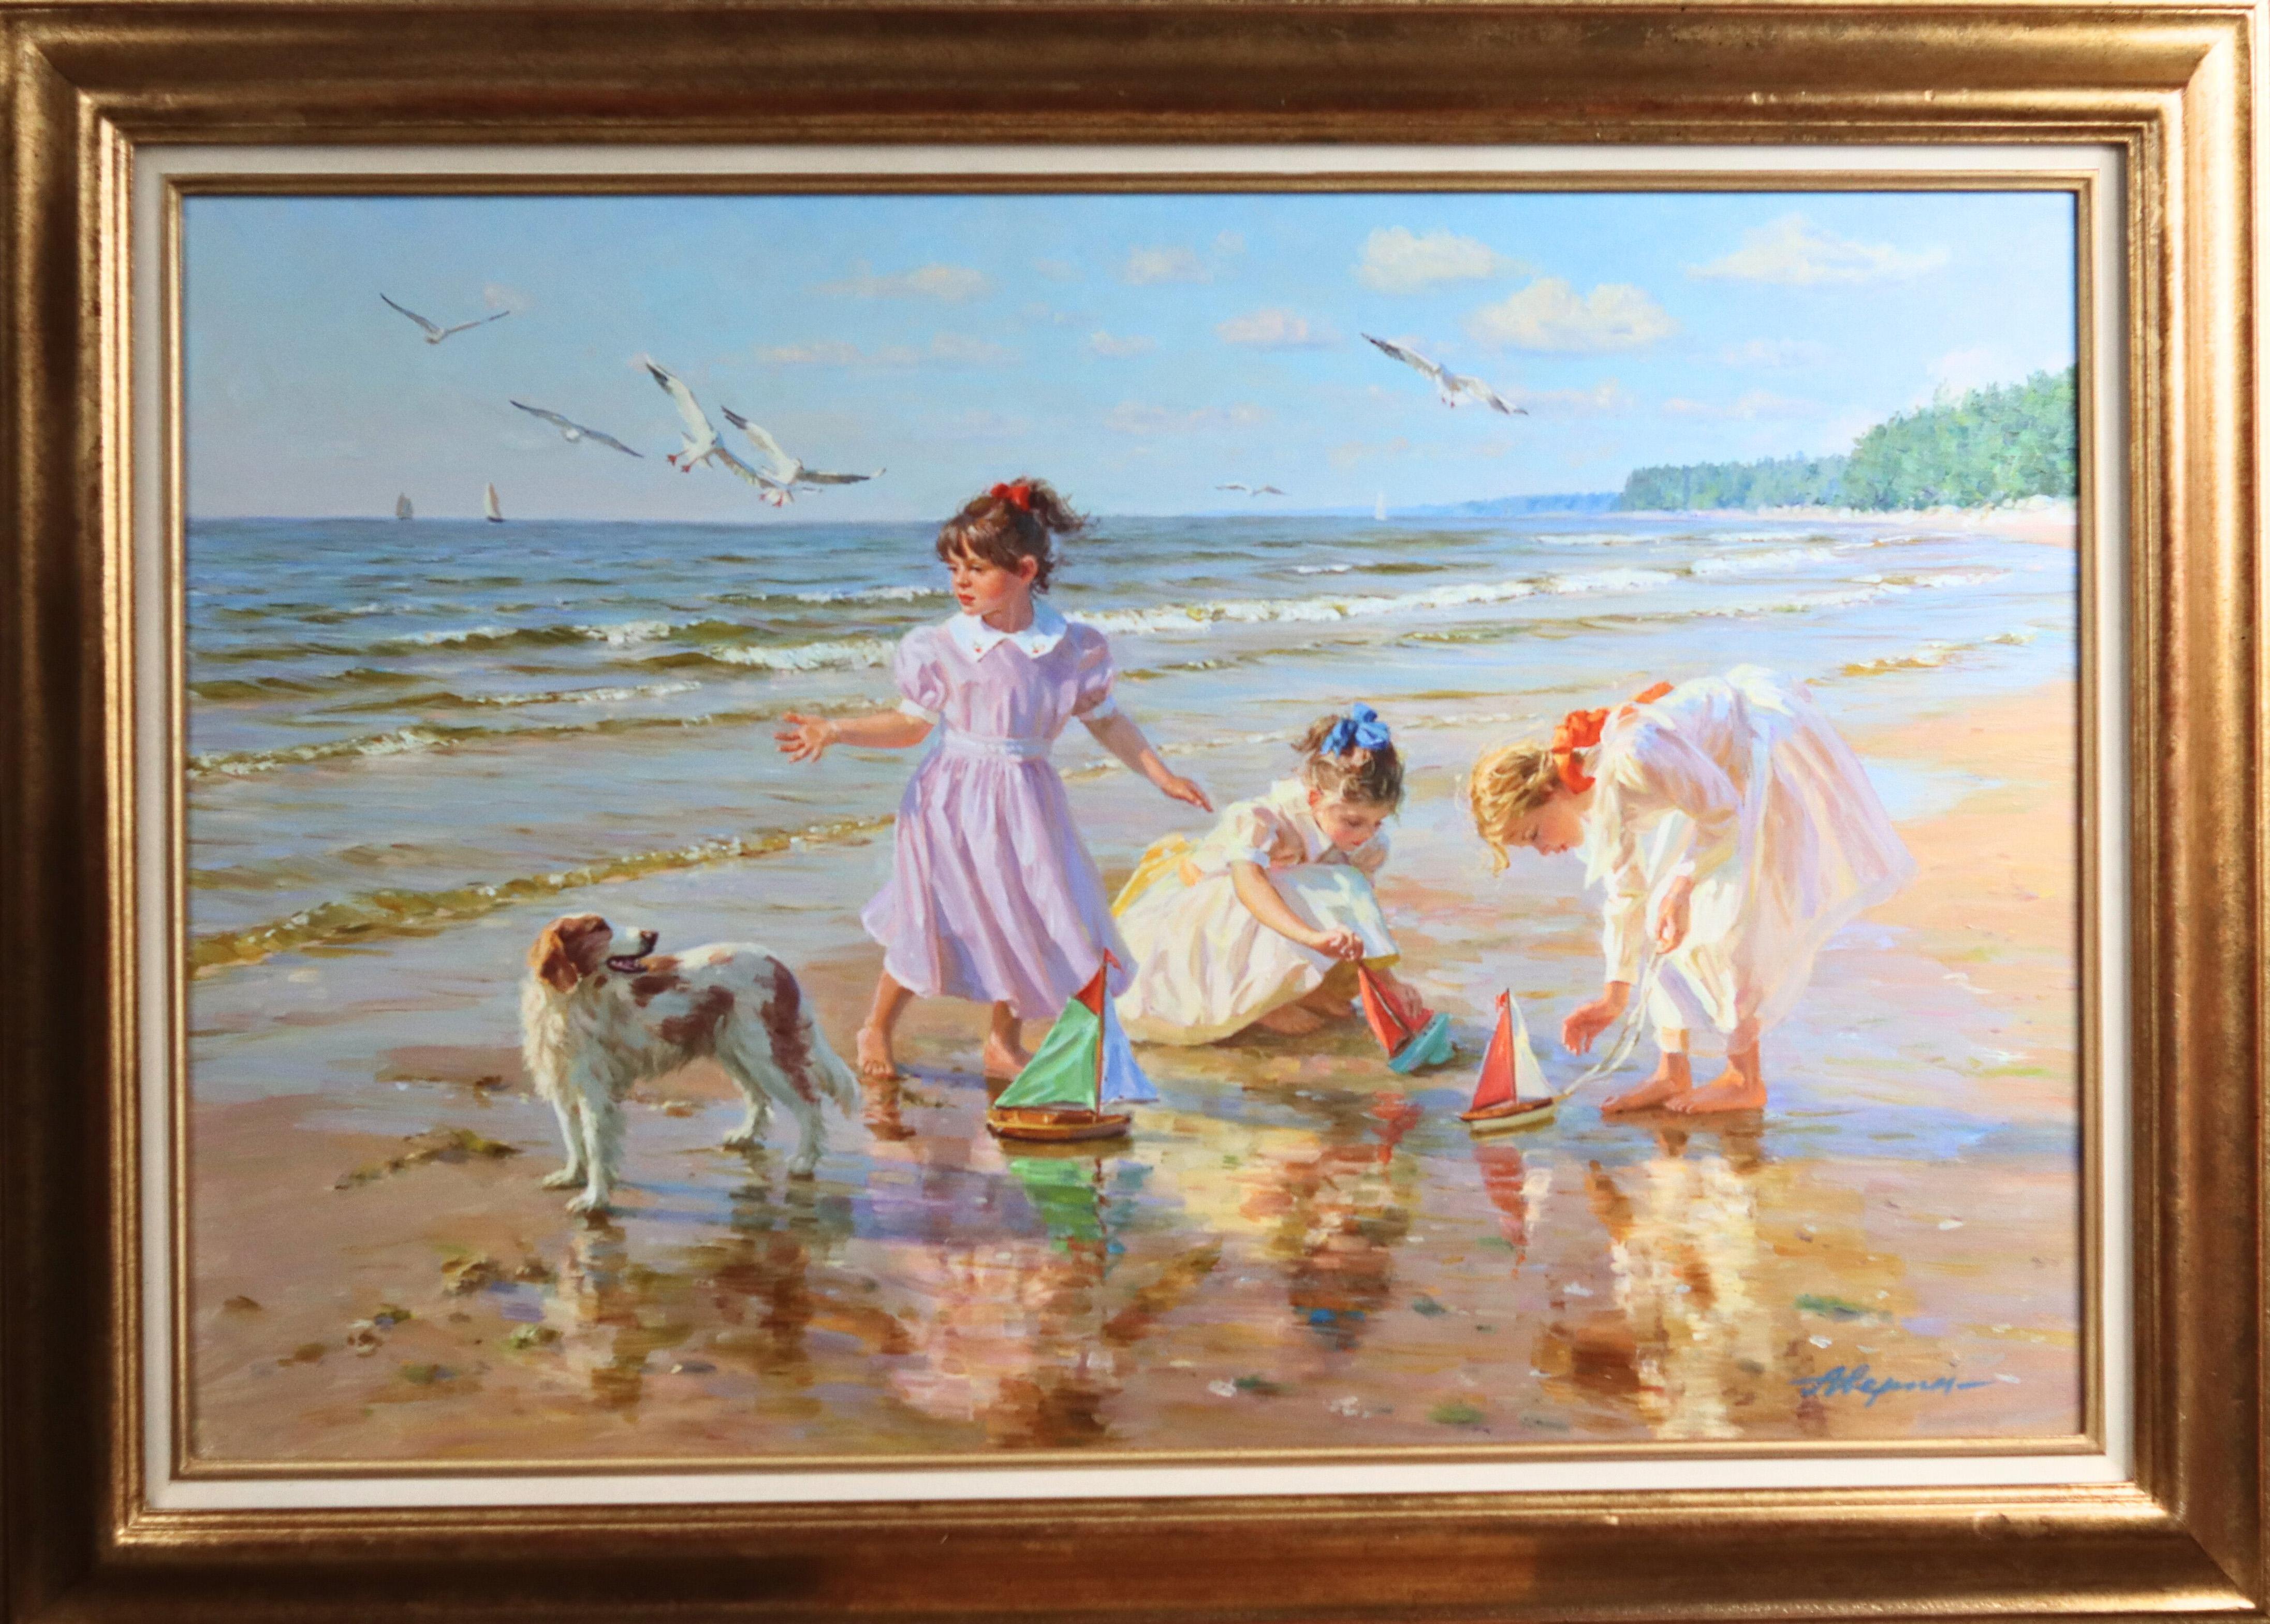 Three Young Girls and a Small Dog, Paddling with Toy Yachts in the Surf          - Painting by Alexander Averin